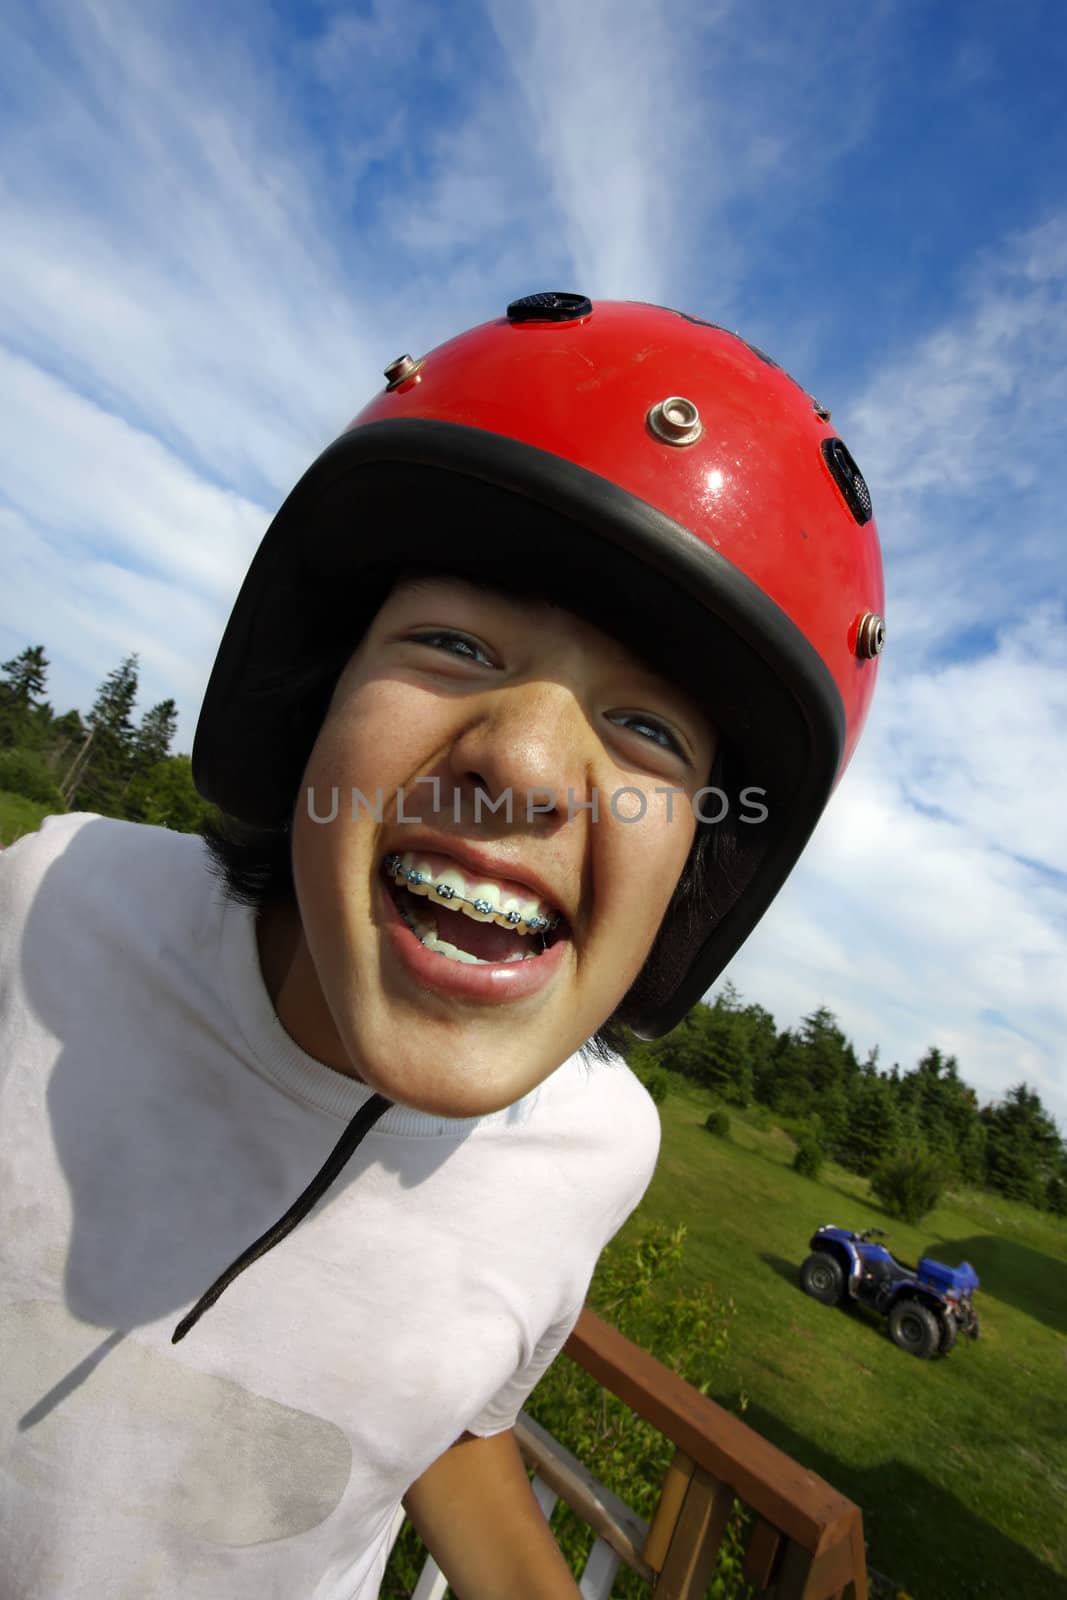 An ecstatic Asian boy with red helmet, getting ready to ride an all terrain vehicle parked in the background.
